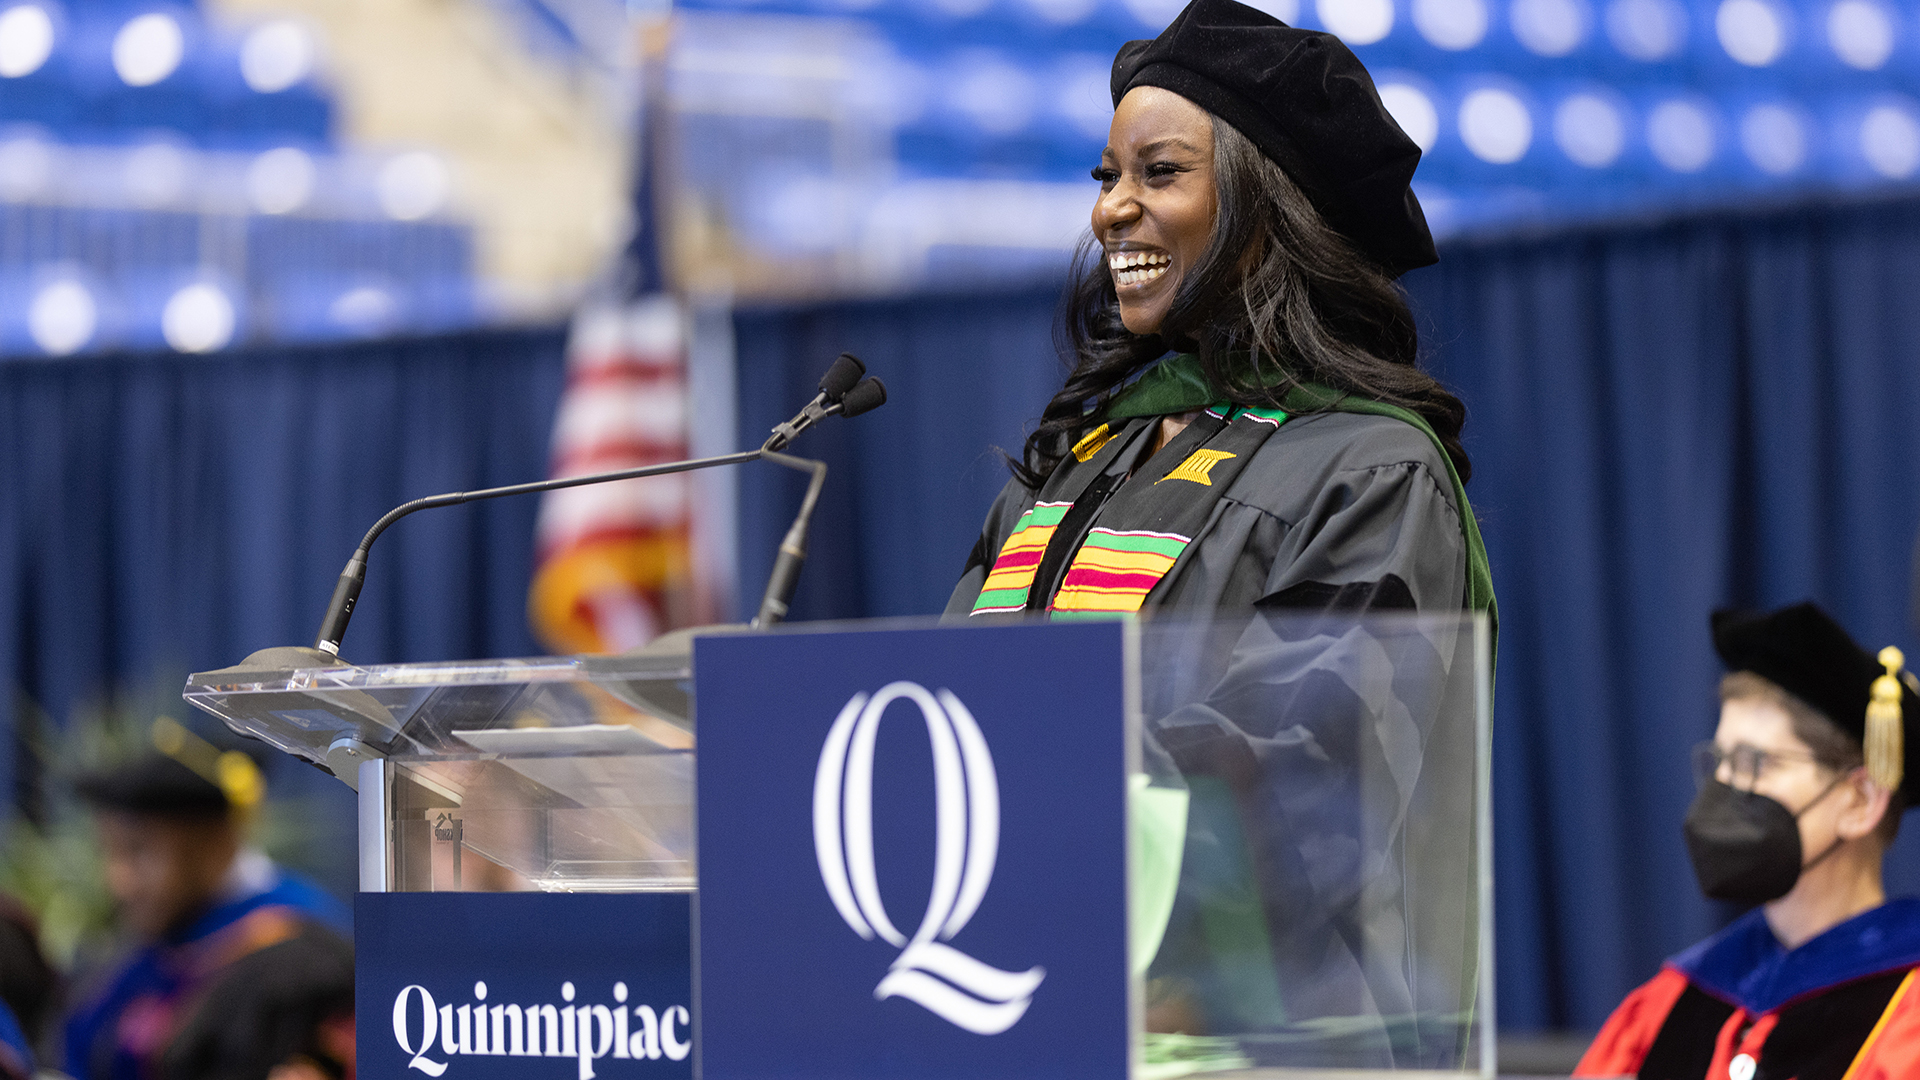 Quinnipiac University confers 96 medical degrees during commencement ceremonies for the Frank H. Netter MD School of Medicine